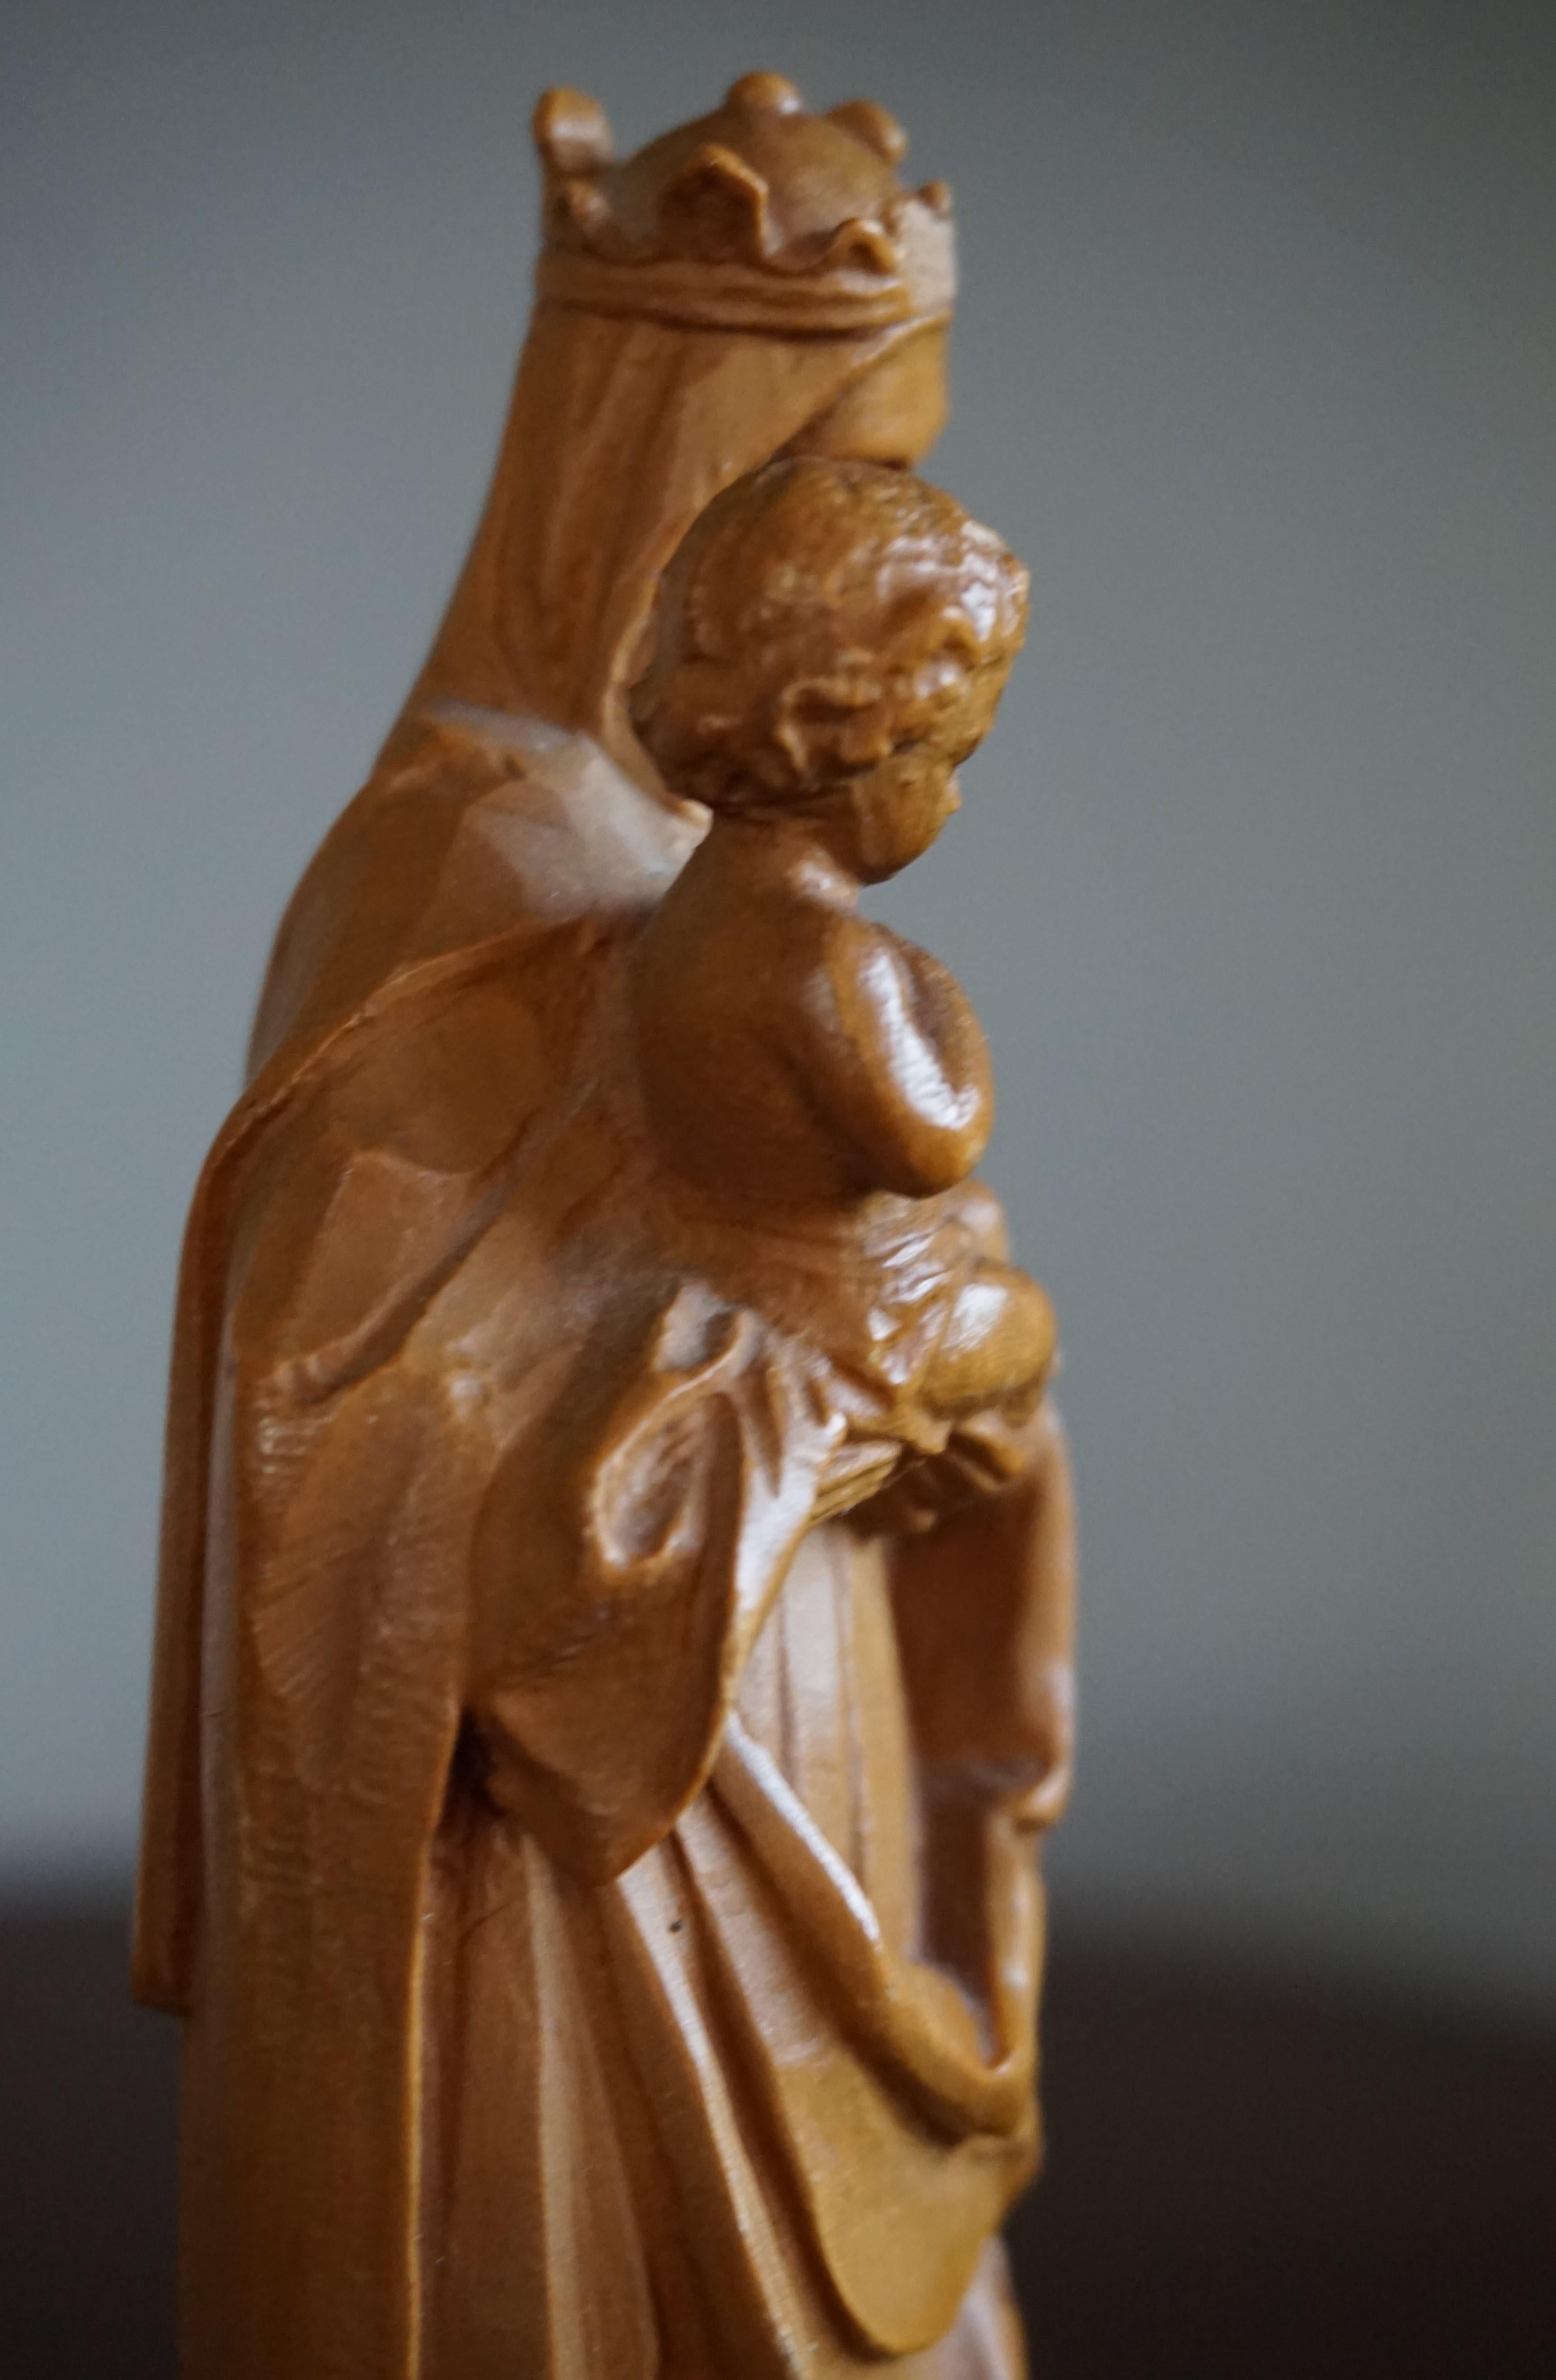 20th Century Finest Quality, Hand Carved Miniature Statue of Mother Mary Holding Child Jesus